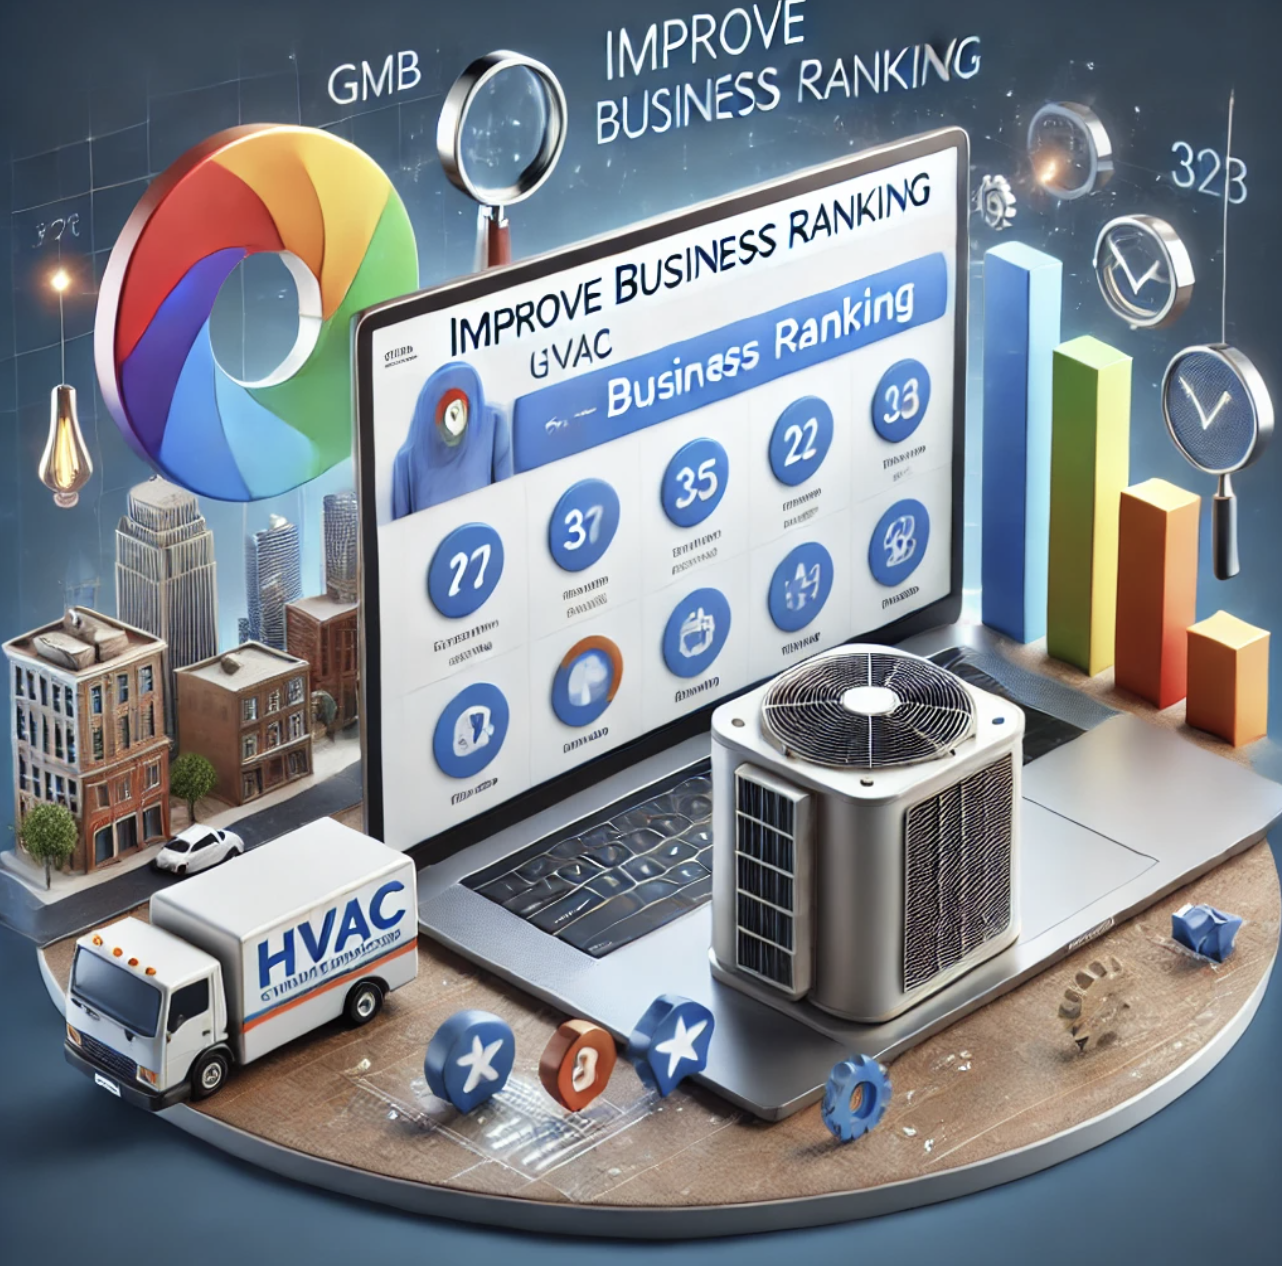 Get Your HVAC Company Google My Business Profile Ranking in San Francisco